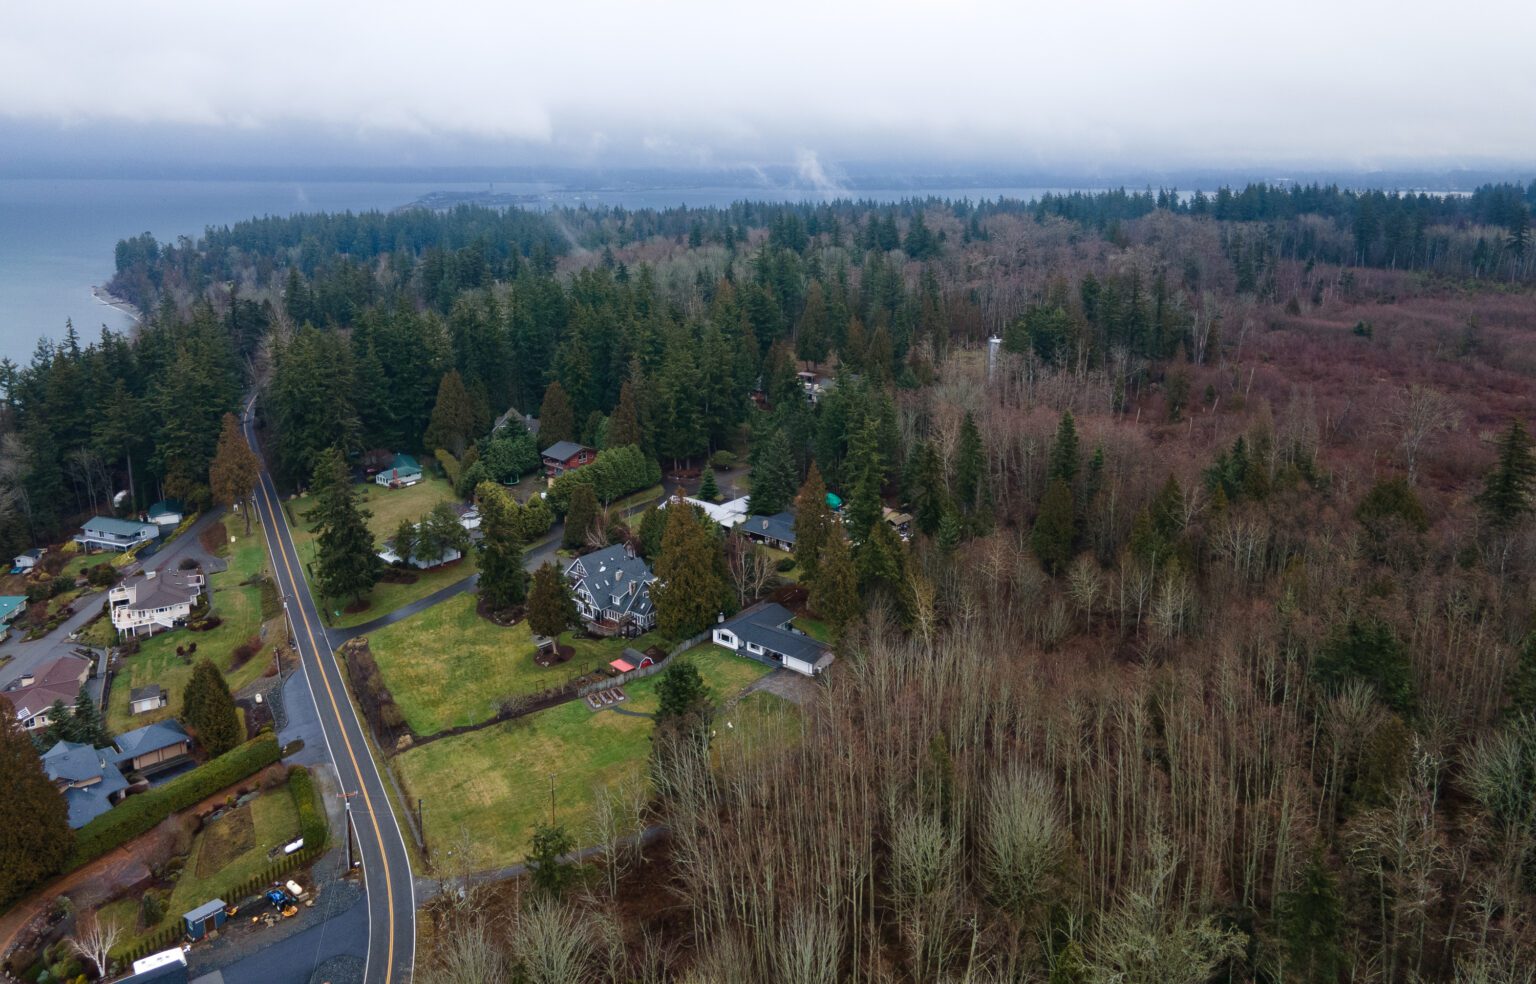 The proposed “Ridge at Semiahmoo” would include 25 homes across 11.3 acres of undeveloped forest on the west side of Semiahmoo surrounding Semiahmoo Ridge road.